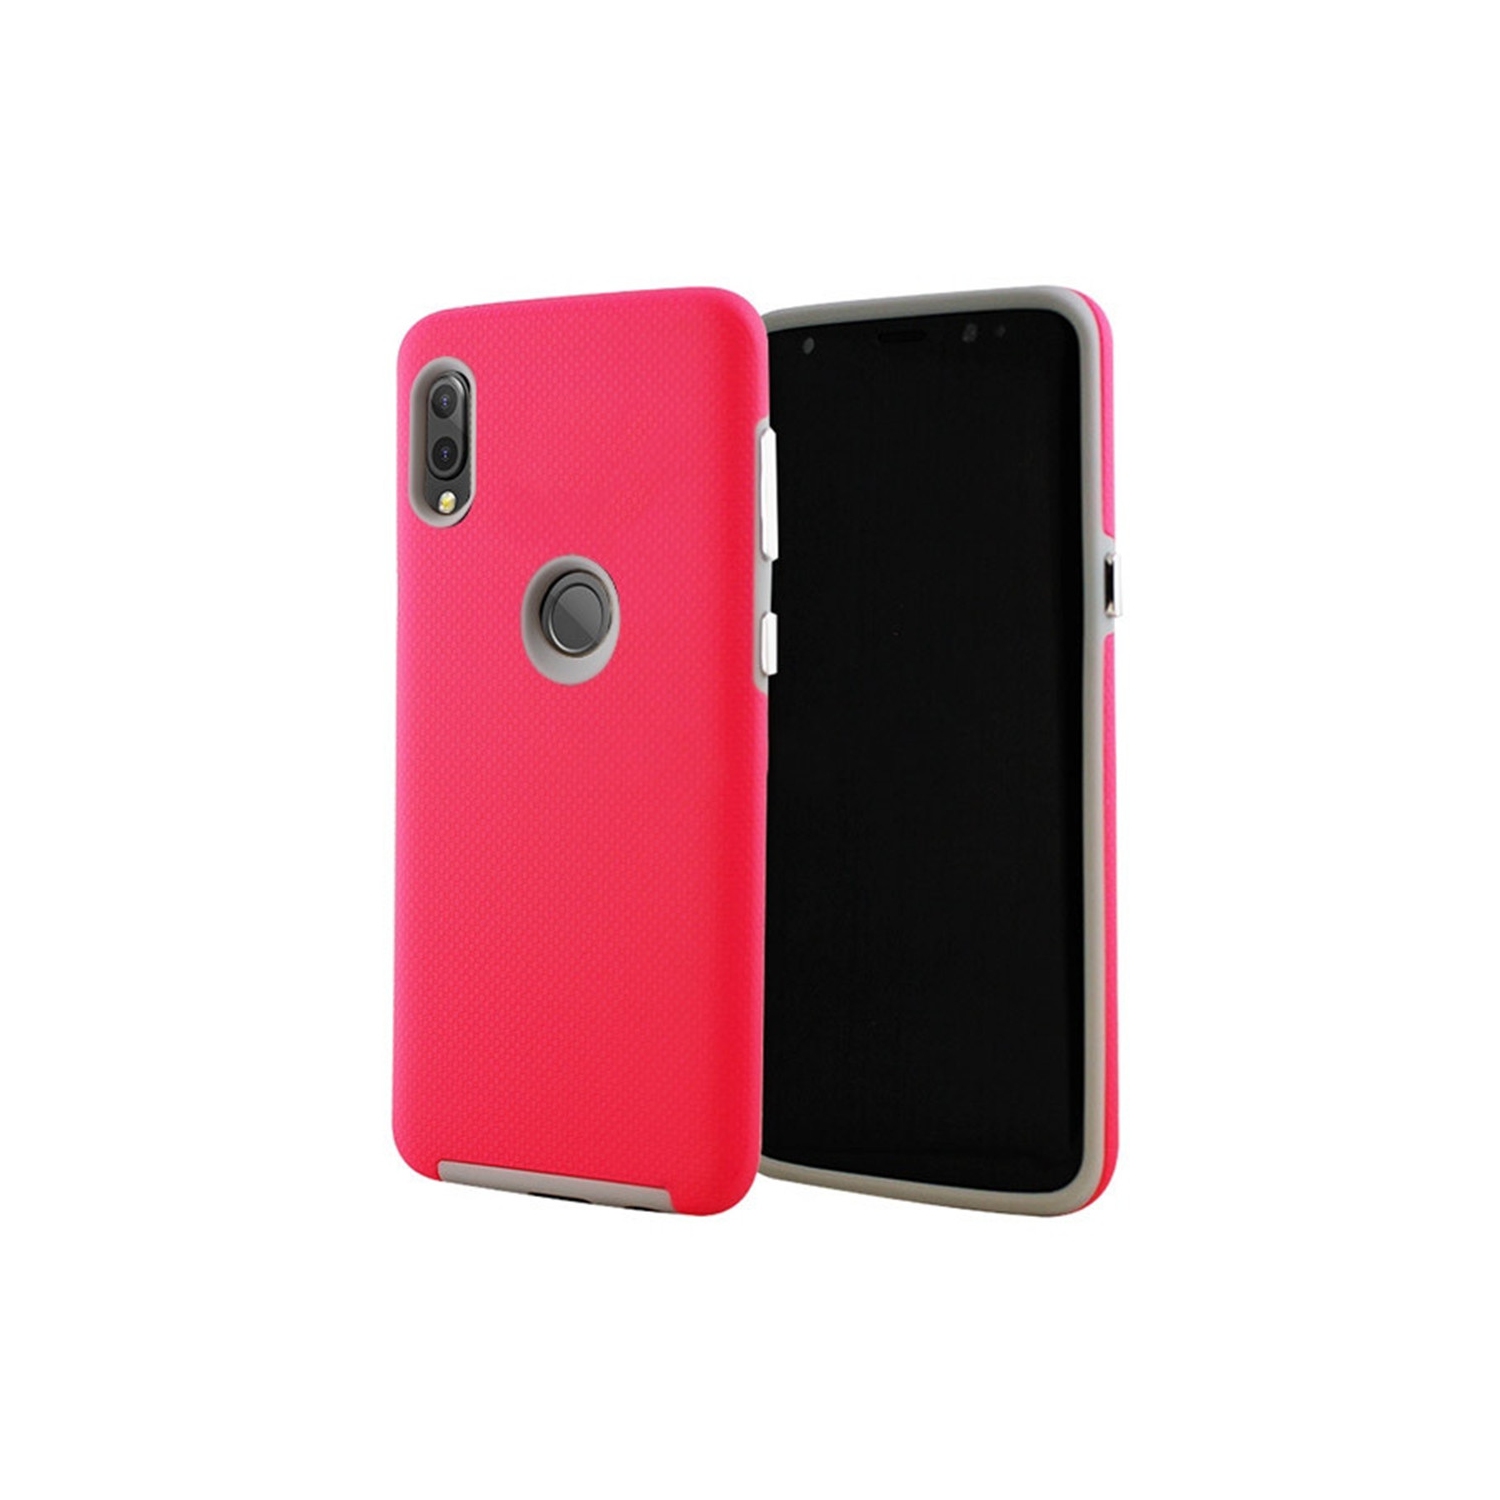 【CSmart】 Slim Fitted Hybrid Hard PC Shell Shockproof Scratch Resistant Case Cover for Samsung Galaxy A20, Hot Pink